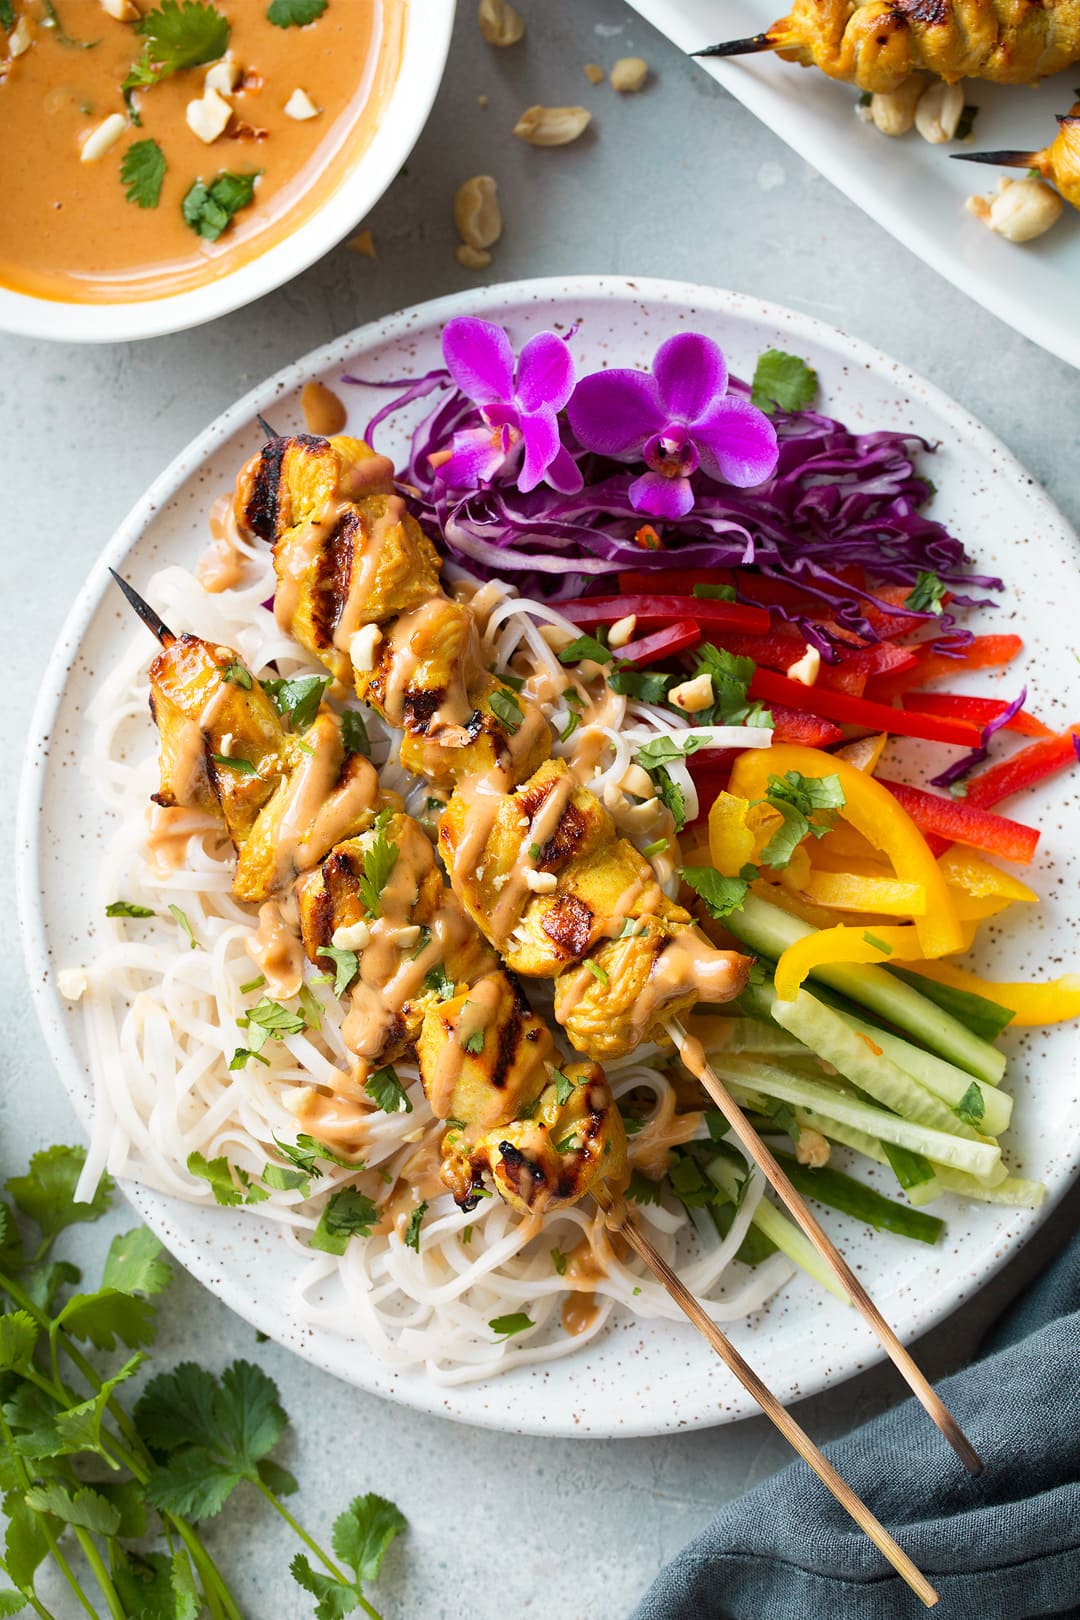 Chicken Satay With Peanut Sauce Cooking Classy,How To Make A Duct Tape Wallet